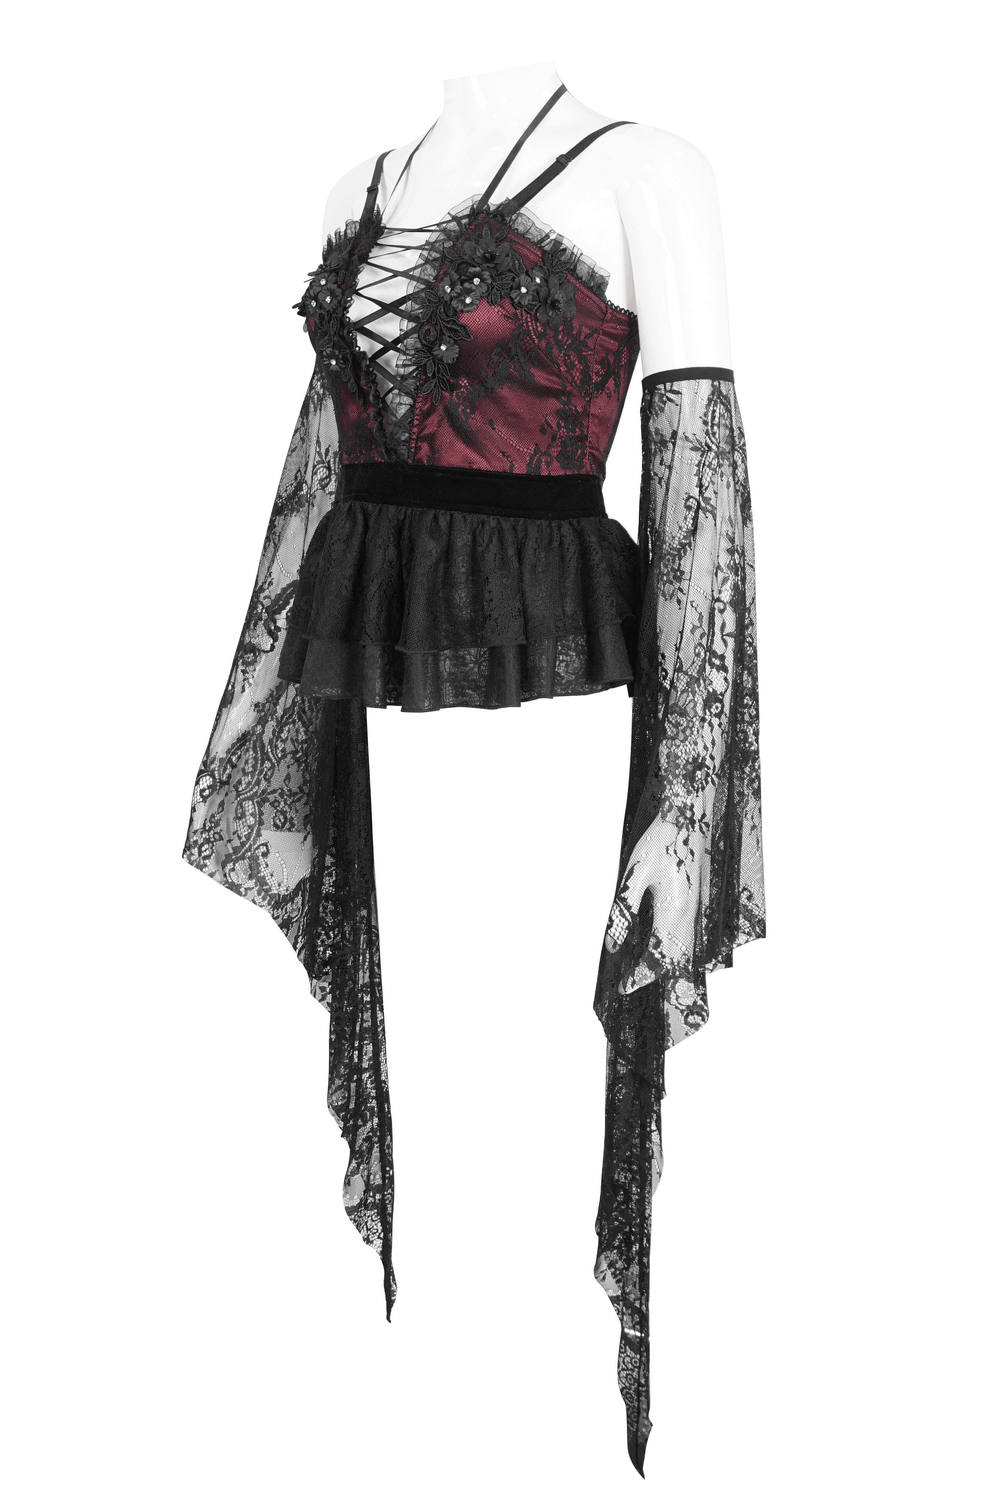 Black Lace Bell Sleeves Top - Gothic Victorian Style